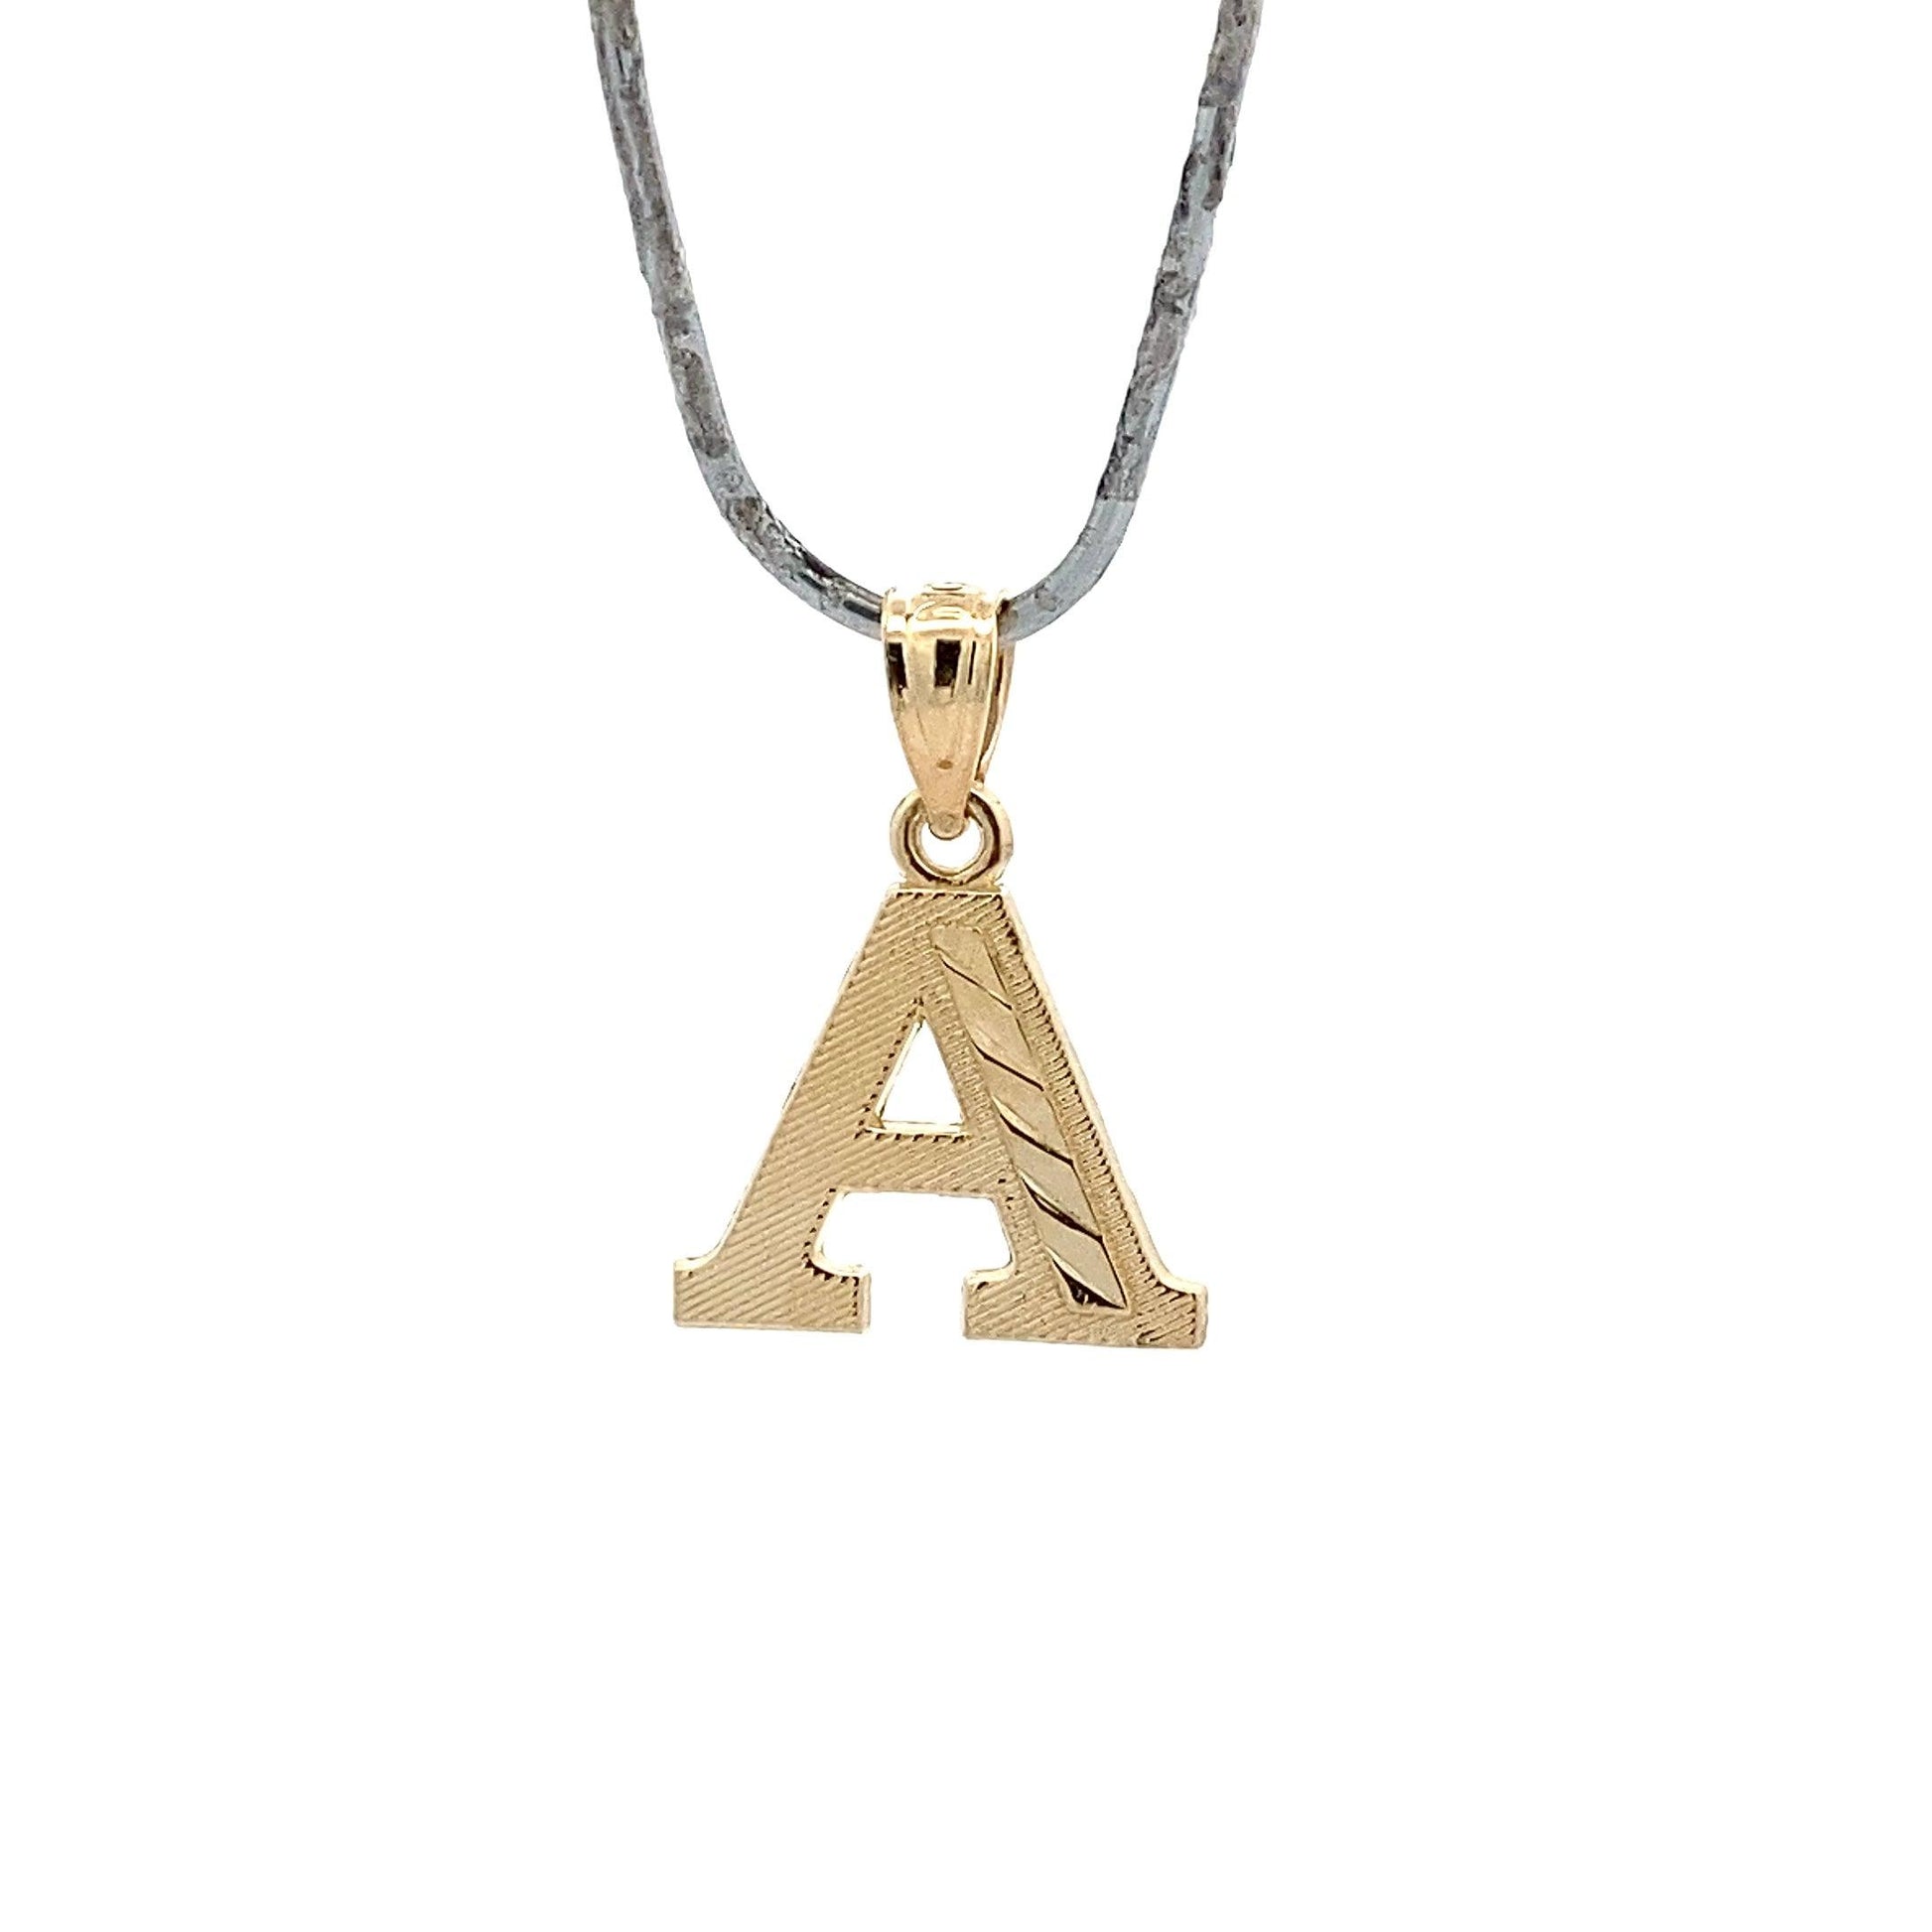 10K Yellow Gold Letter "A" Pendant - ipawnishop.com